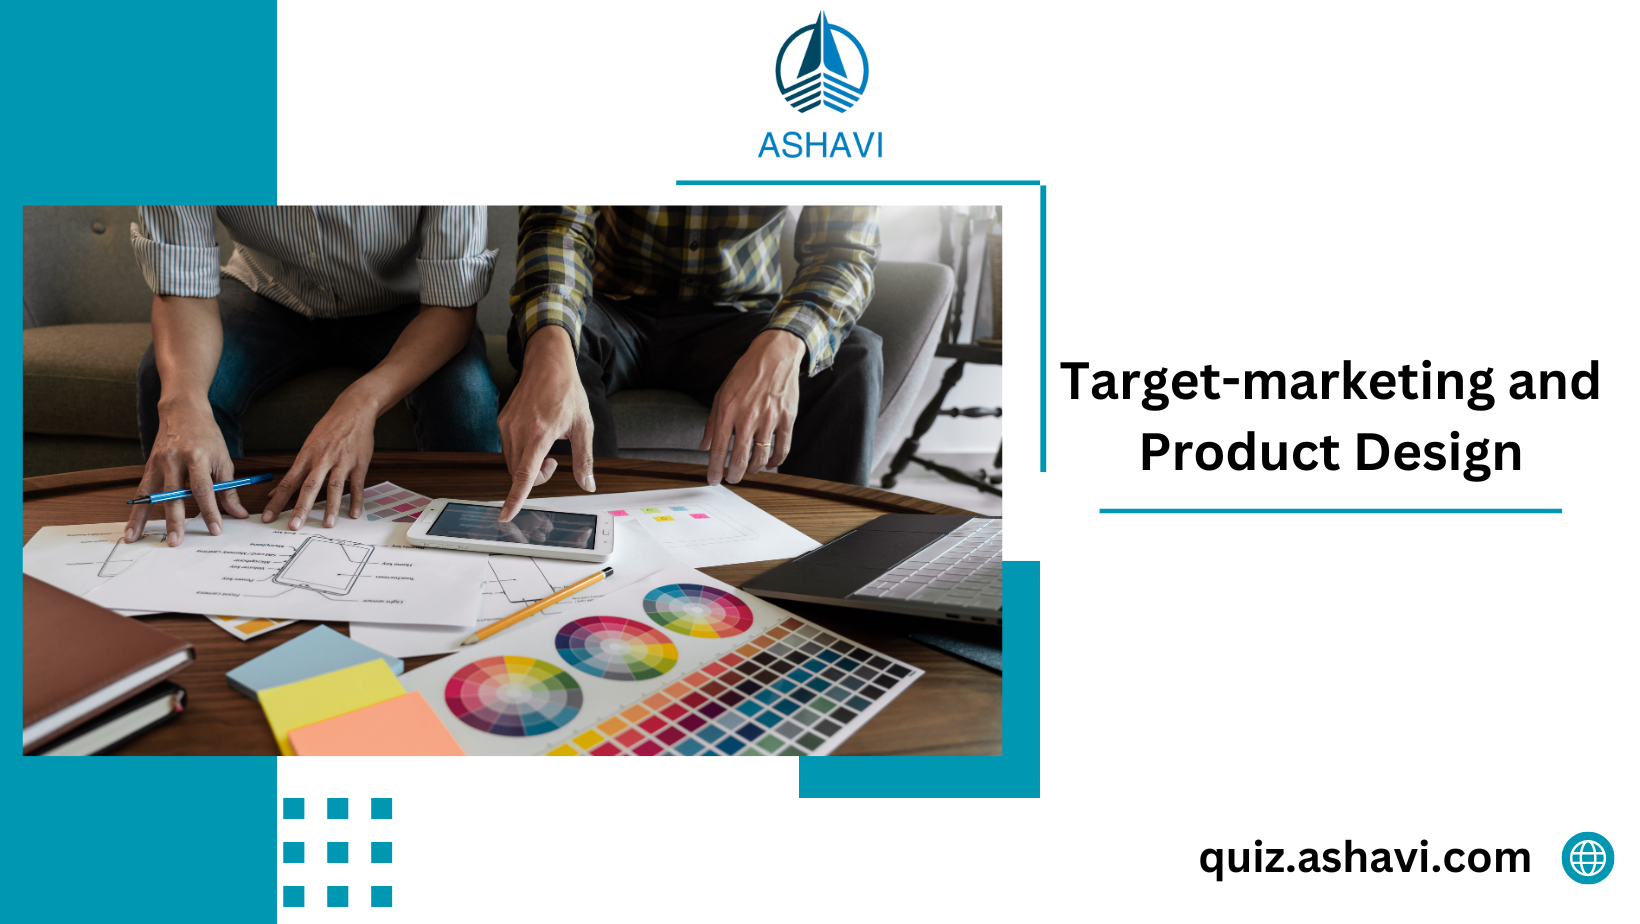 Target-marketing and Product Design